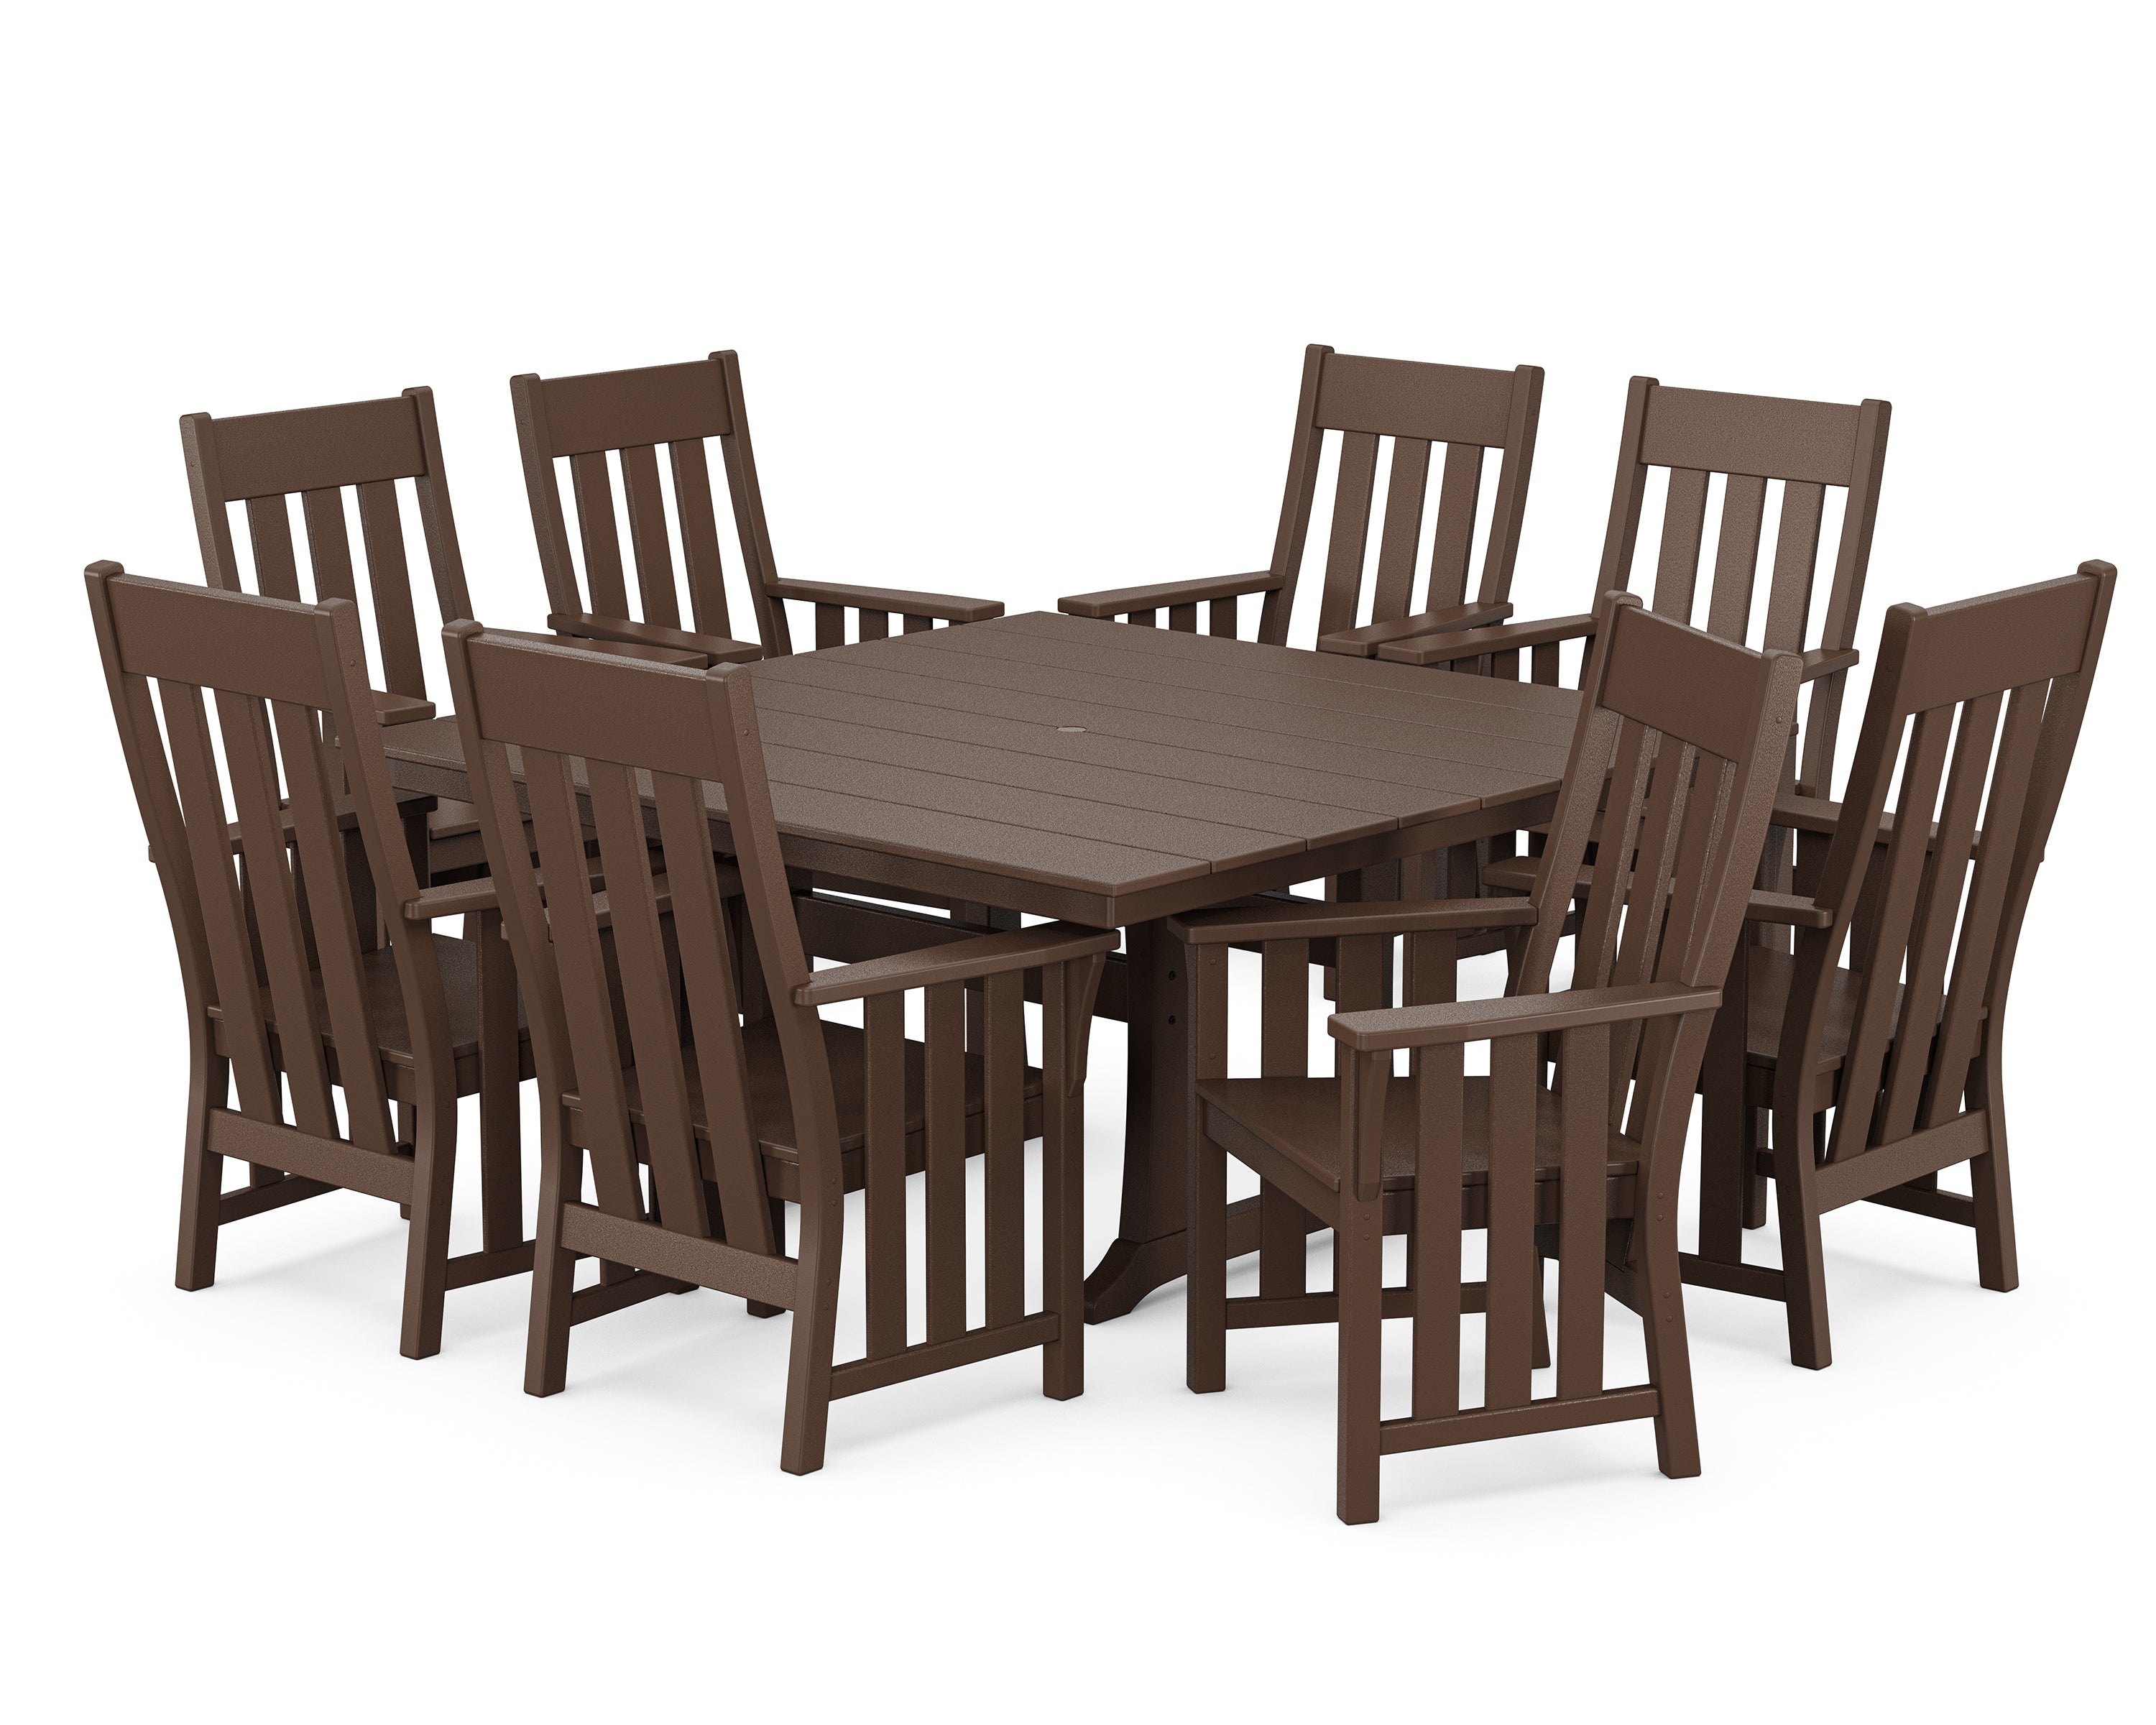 Martha Stewart by POLYWOOD® Acadia 9-Piece Square Farmhouse Dining Set with Trestle Legs in Mahogany